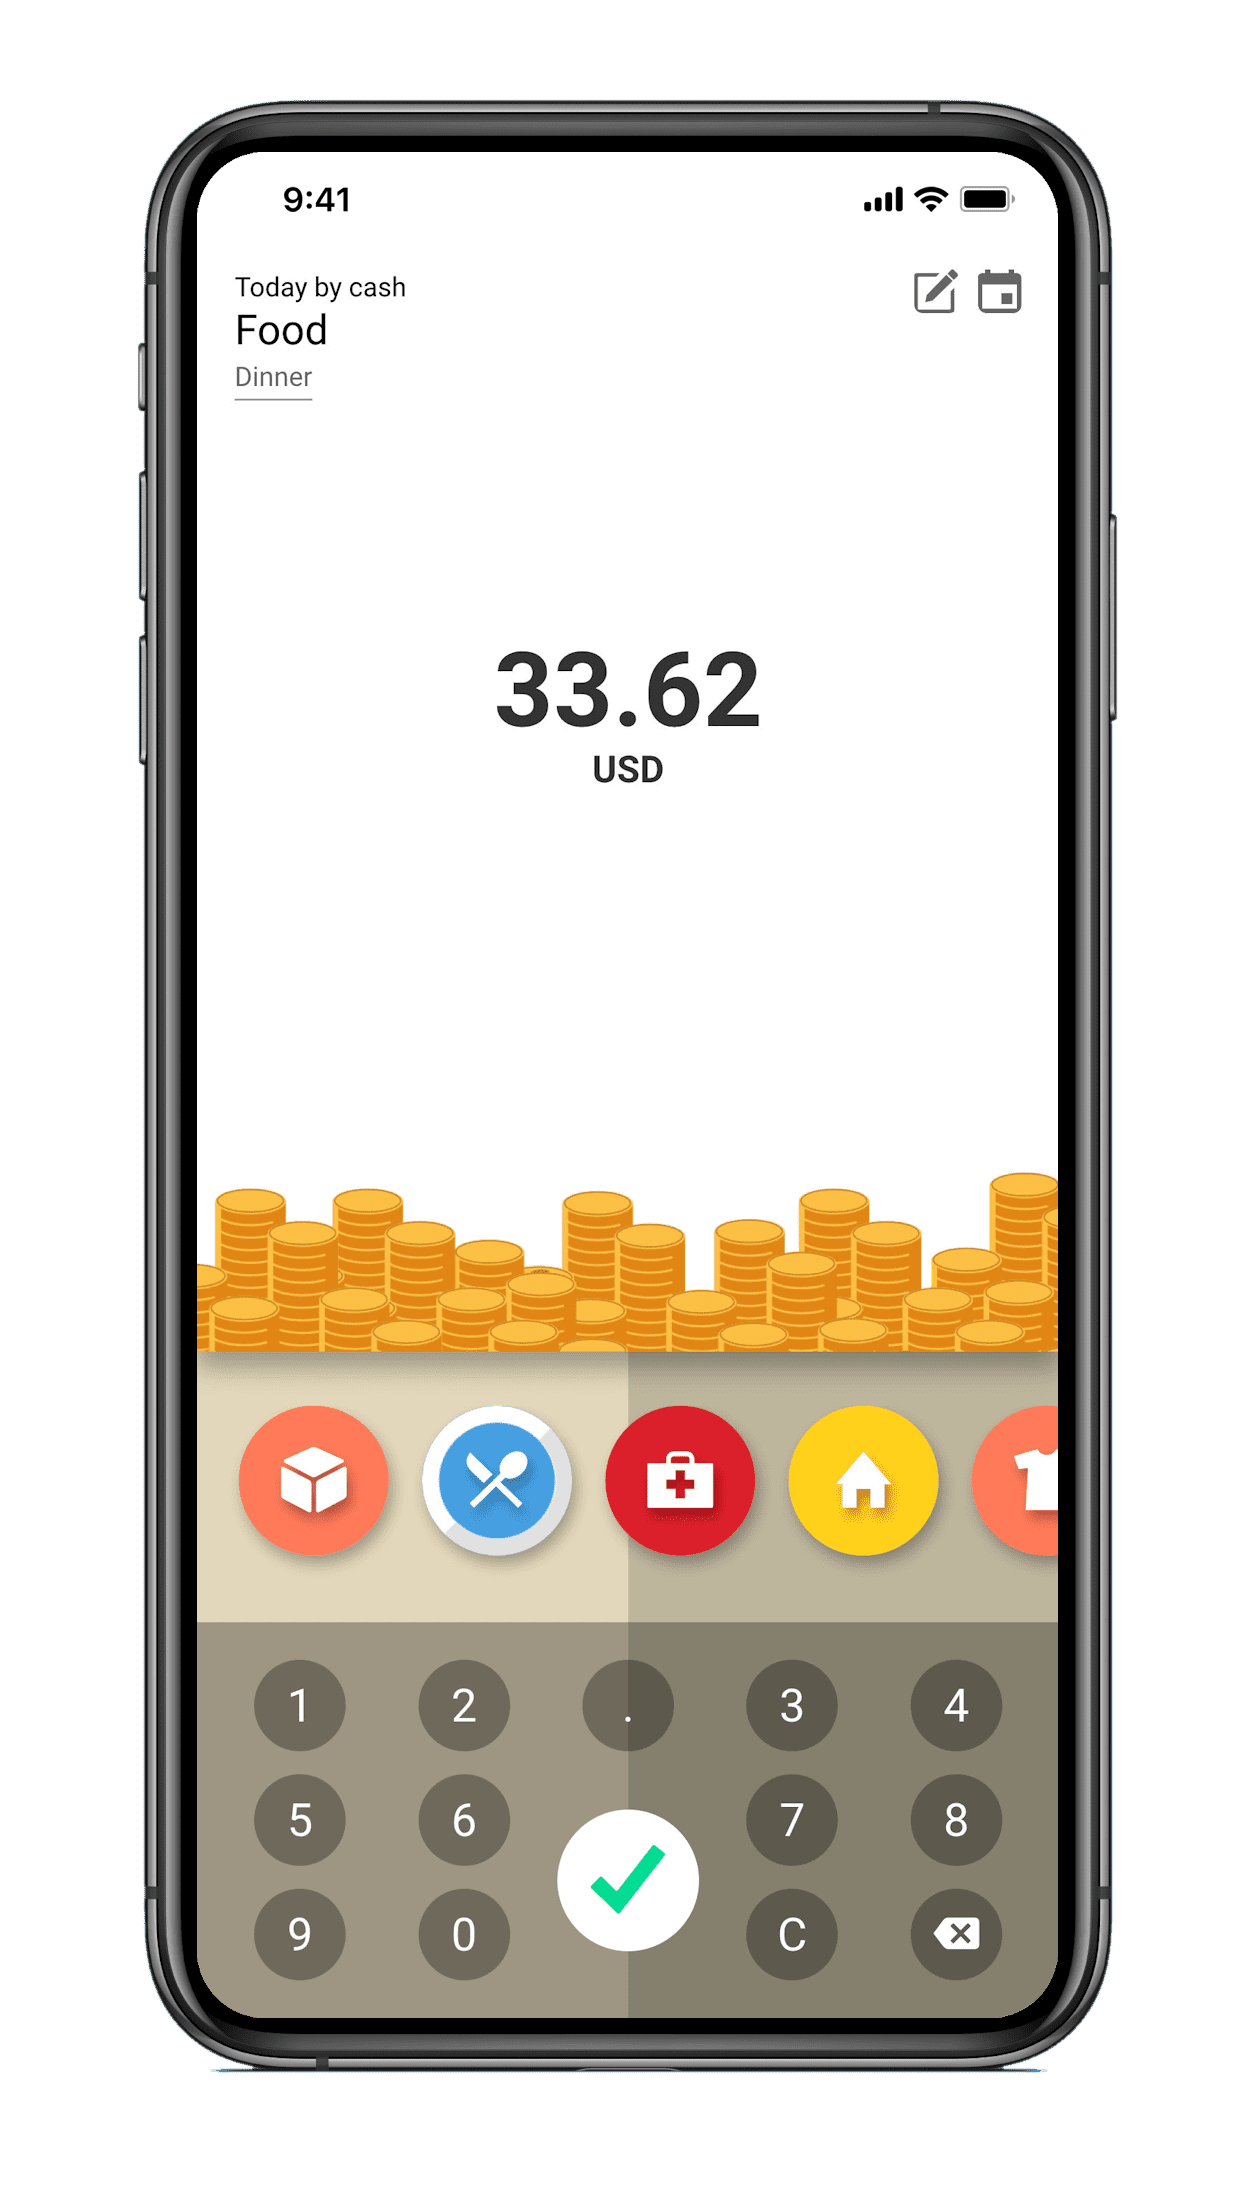 04 wmm en min Where's My Money? Control your expenses and wallet! Track your cash, bills, fees, payment and spending EASILY!